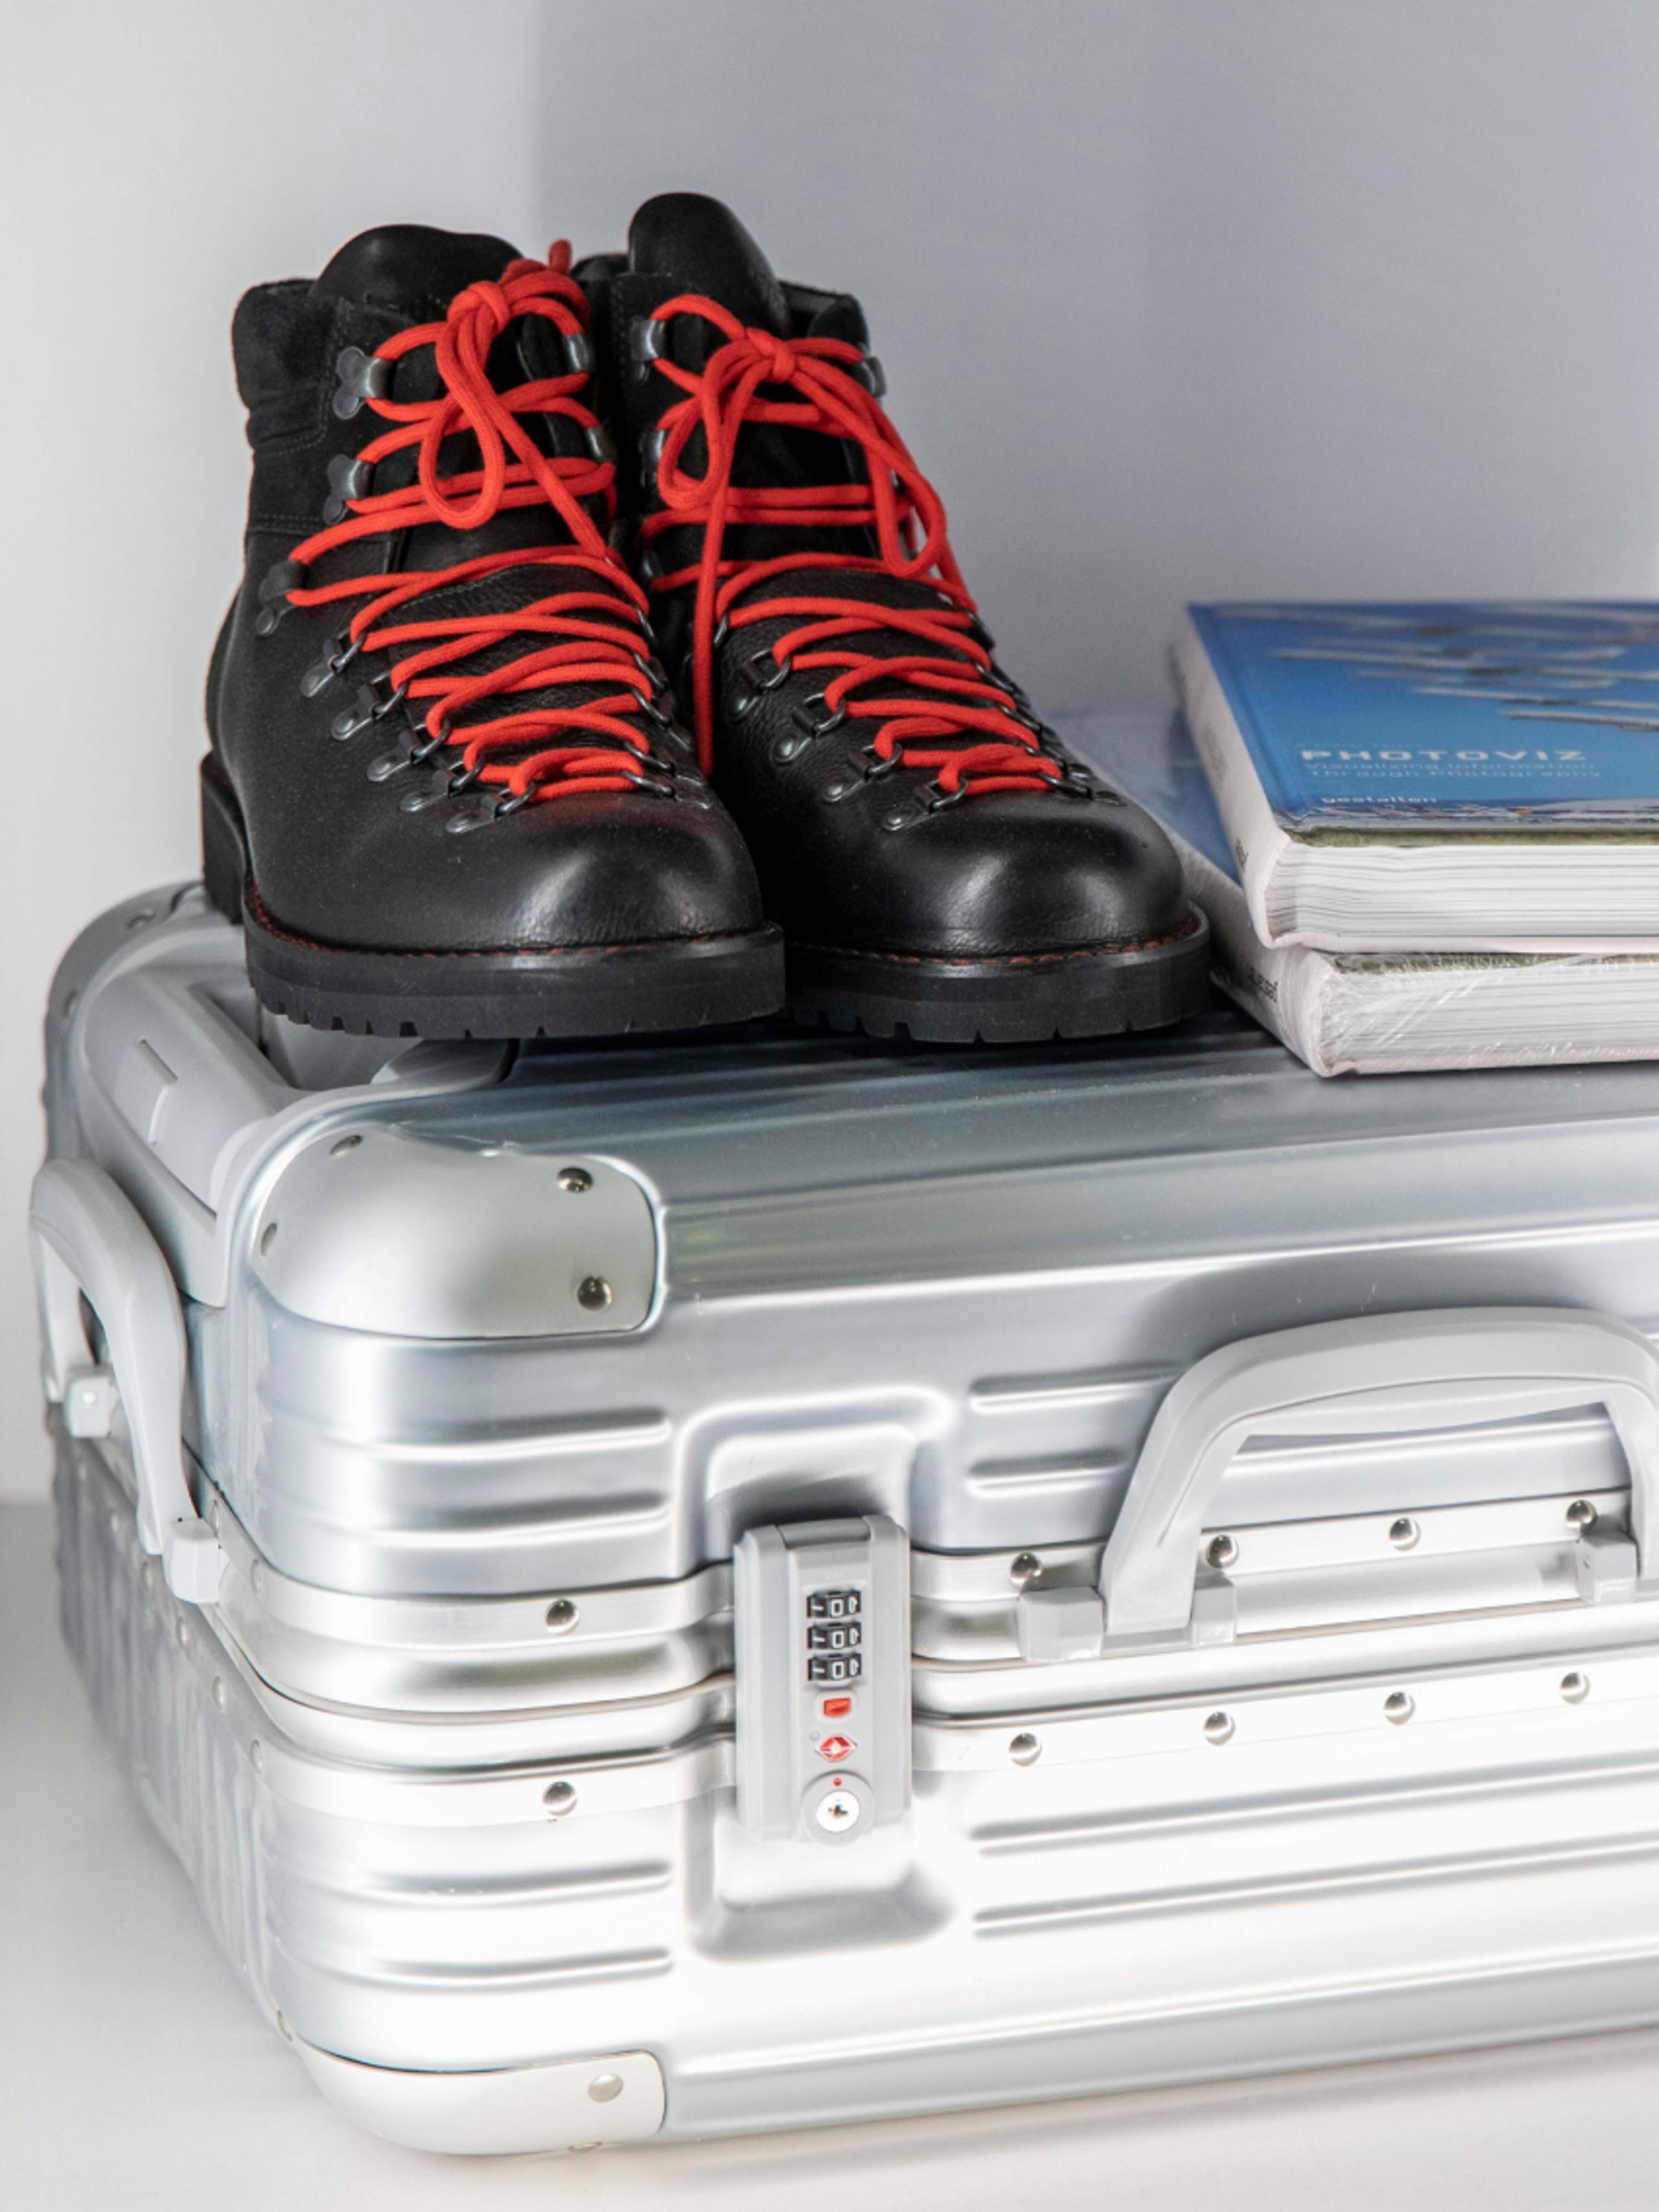 View of AETHER boots sitting top of aluminum luggage